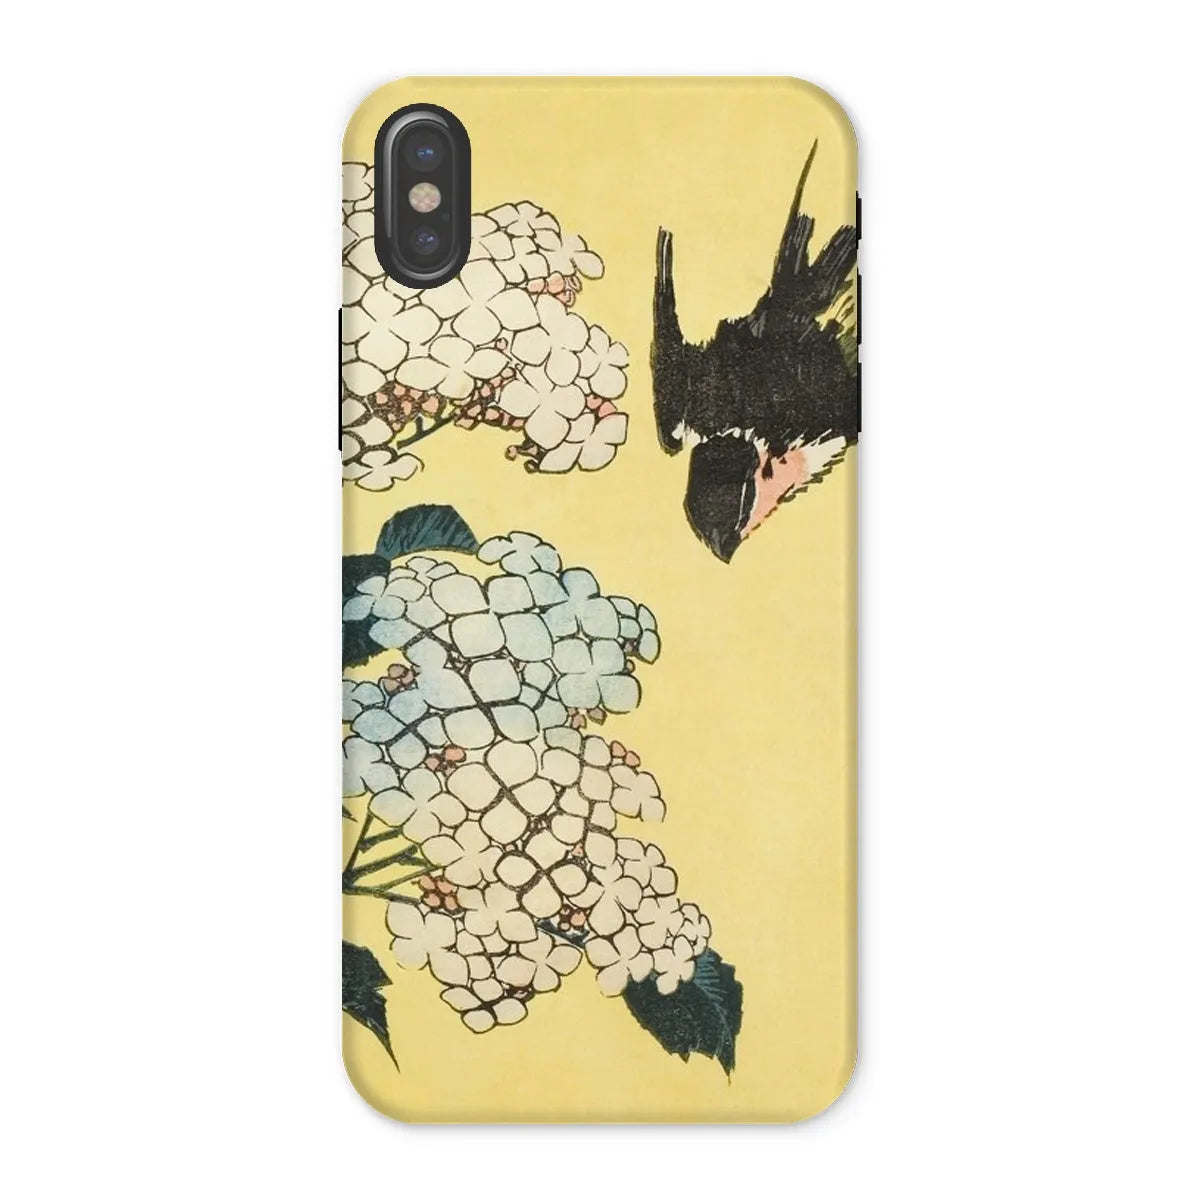 Hydrangea And Swallow - Japanese Art Phone Case - Hokusai - Iphone x / Matte - Mobile Phone Cases - Aesthetic Art